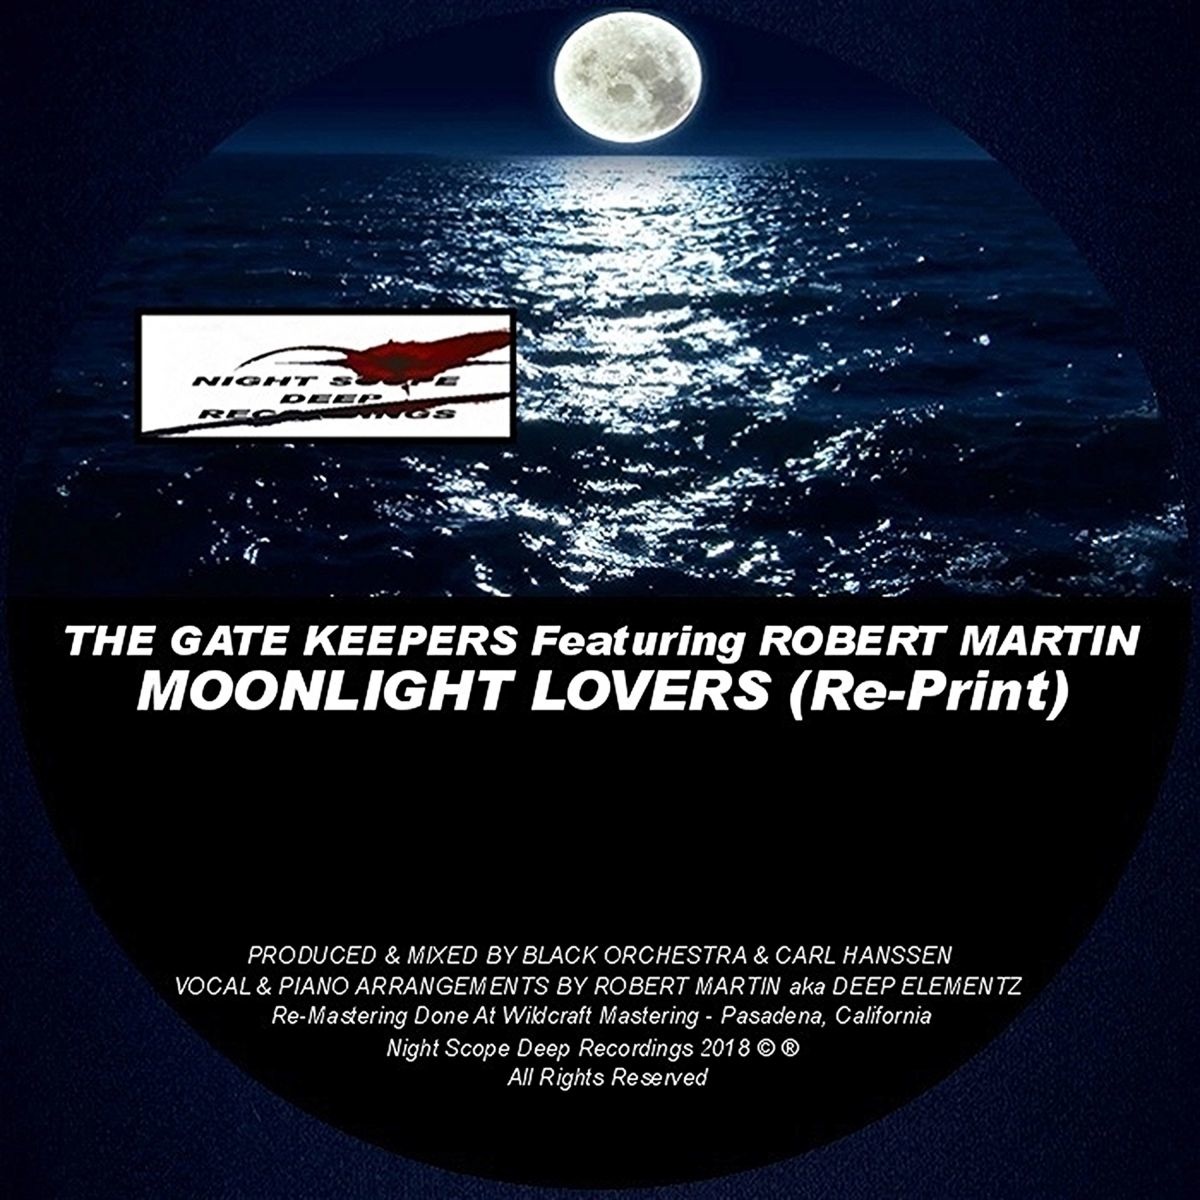 The Gate Keepers - Moonlight Lovers (Re-Print) / Night Scope Deep Recordings